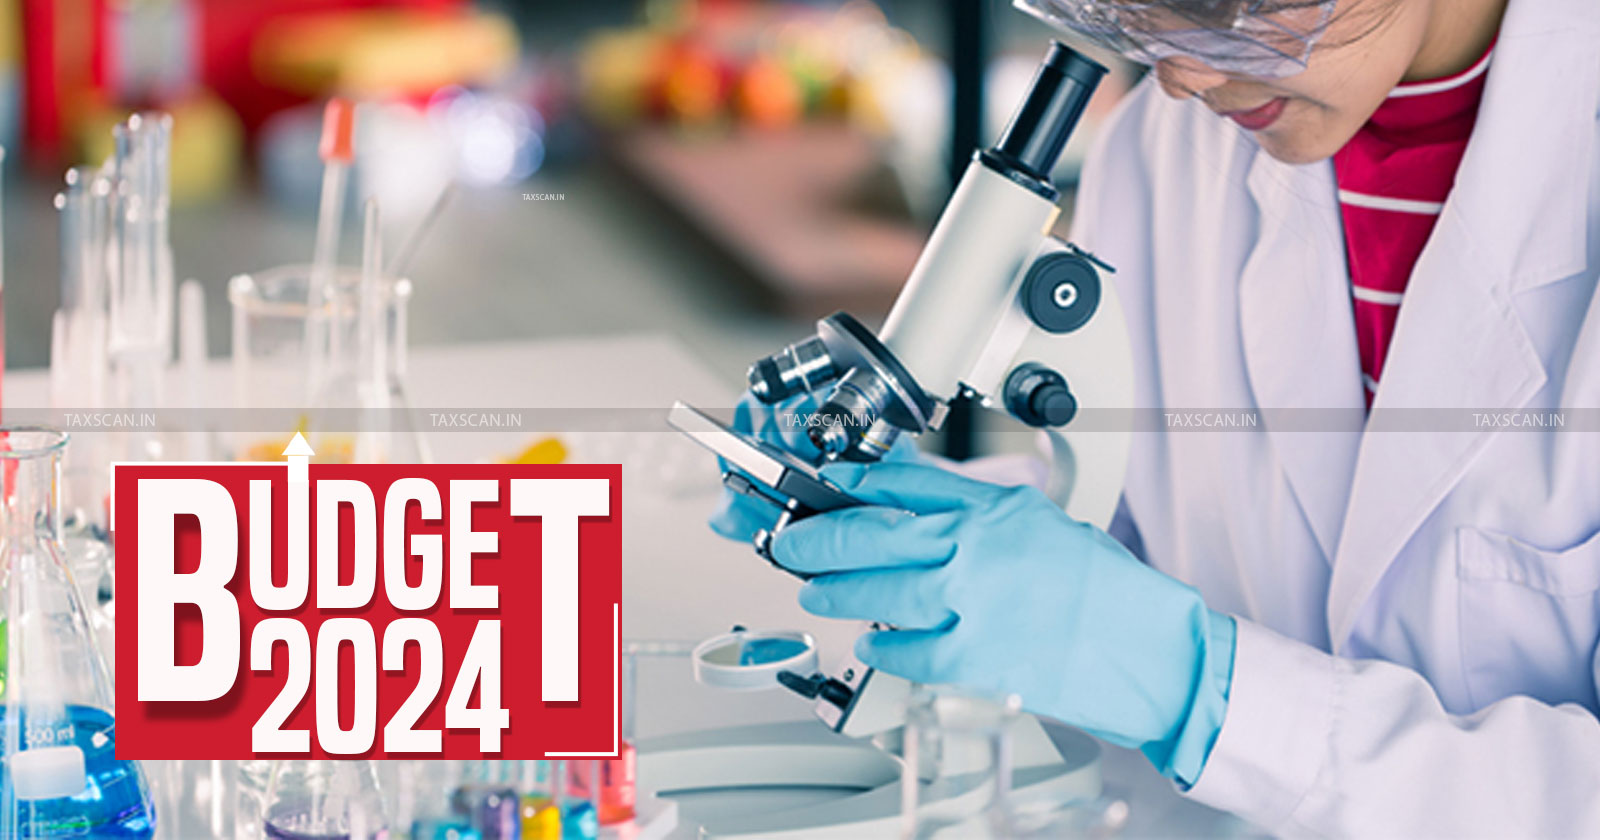 Interim Budget 2024 - Expects Tax Break - Funding - Innovations - Indian Pharma Industry - taxscan